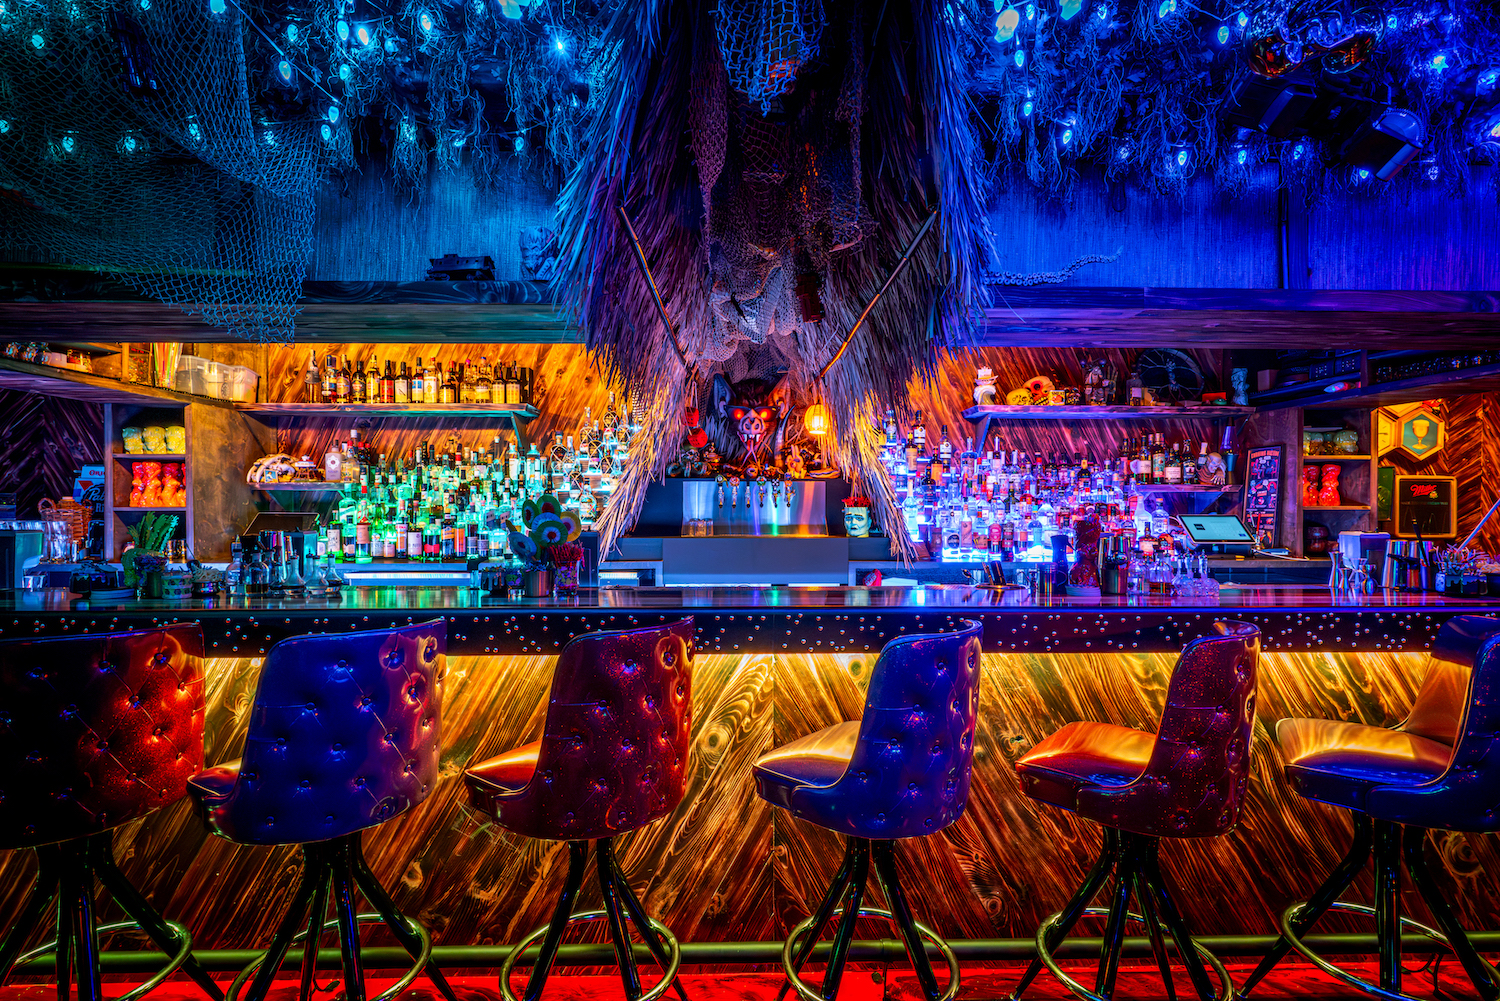 Interior shot of Paradise Lost's bar, with different-colored lights and bar stools decorated in a tiki theme